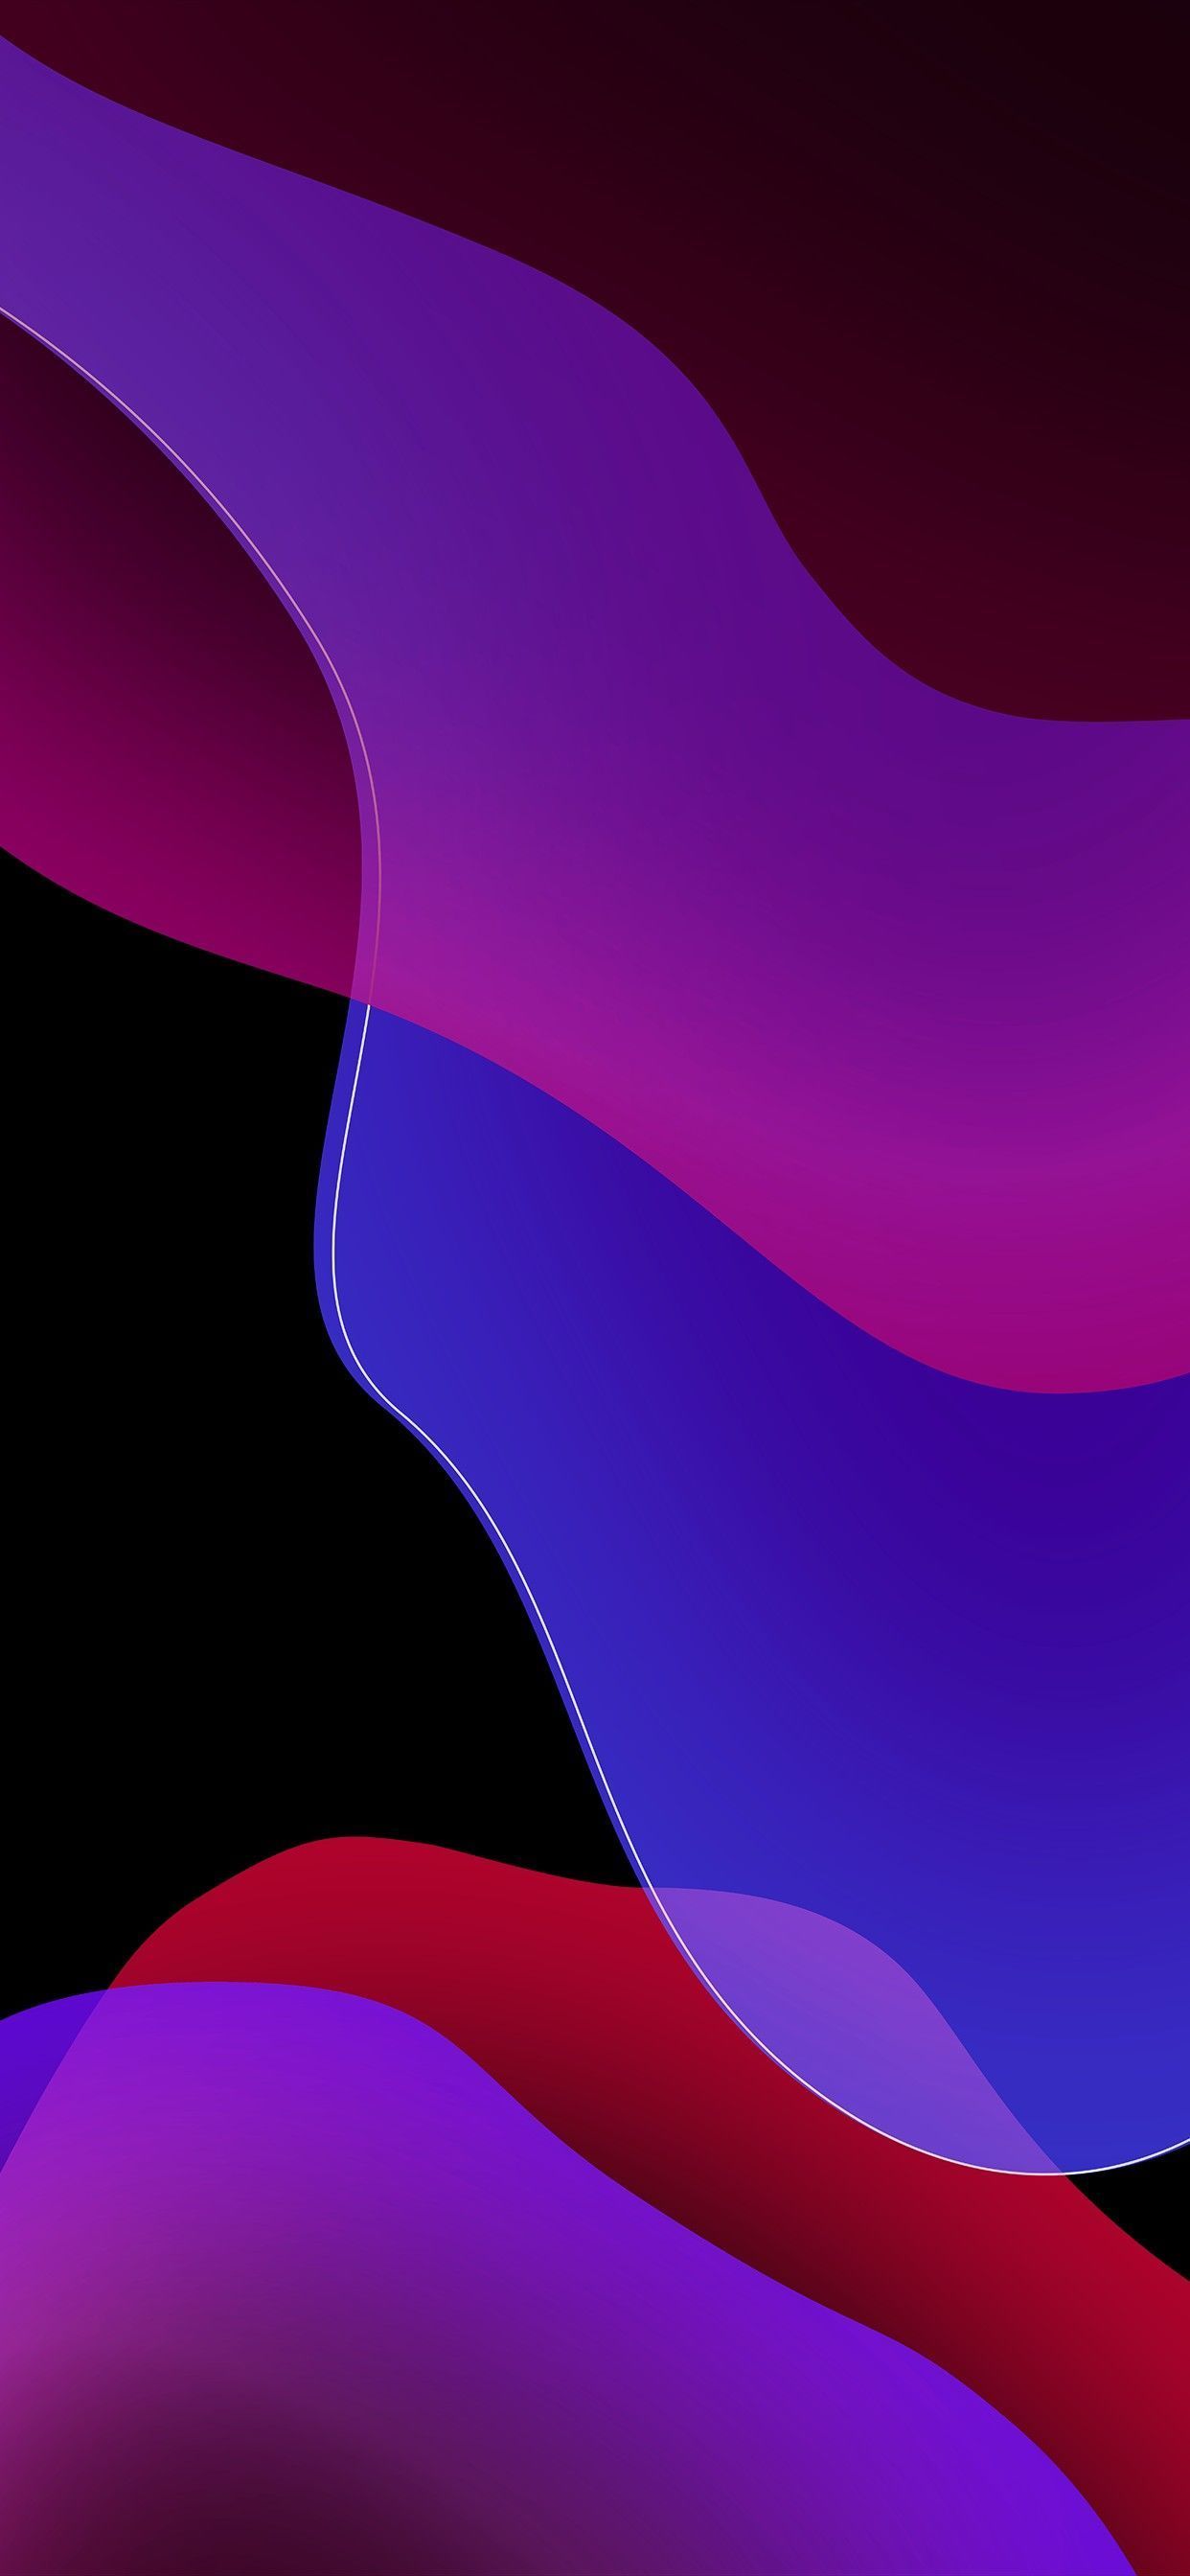 Galaxy S21 Wallpapers - Wallpaper Cave